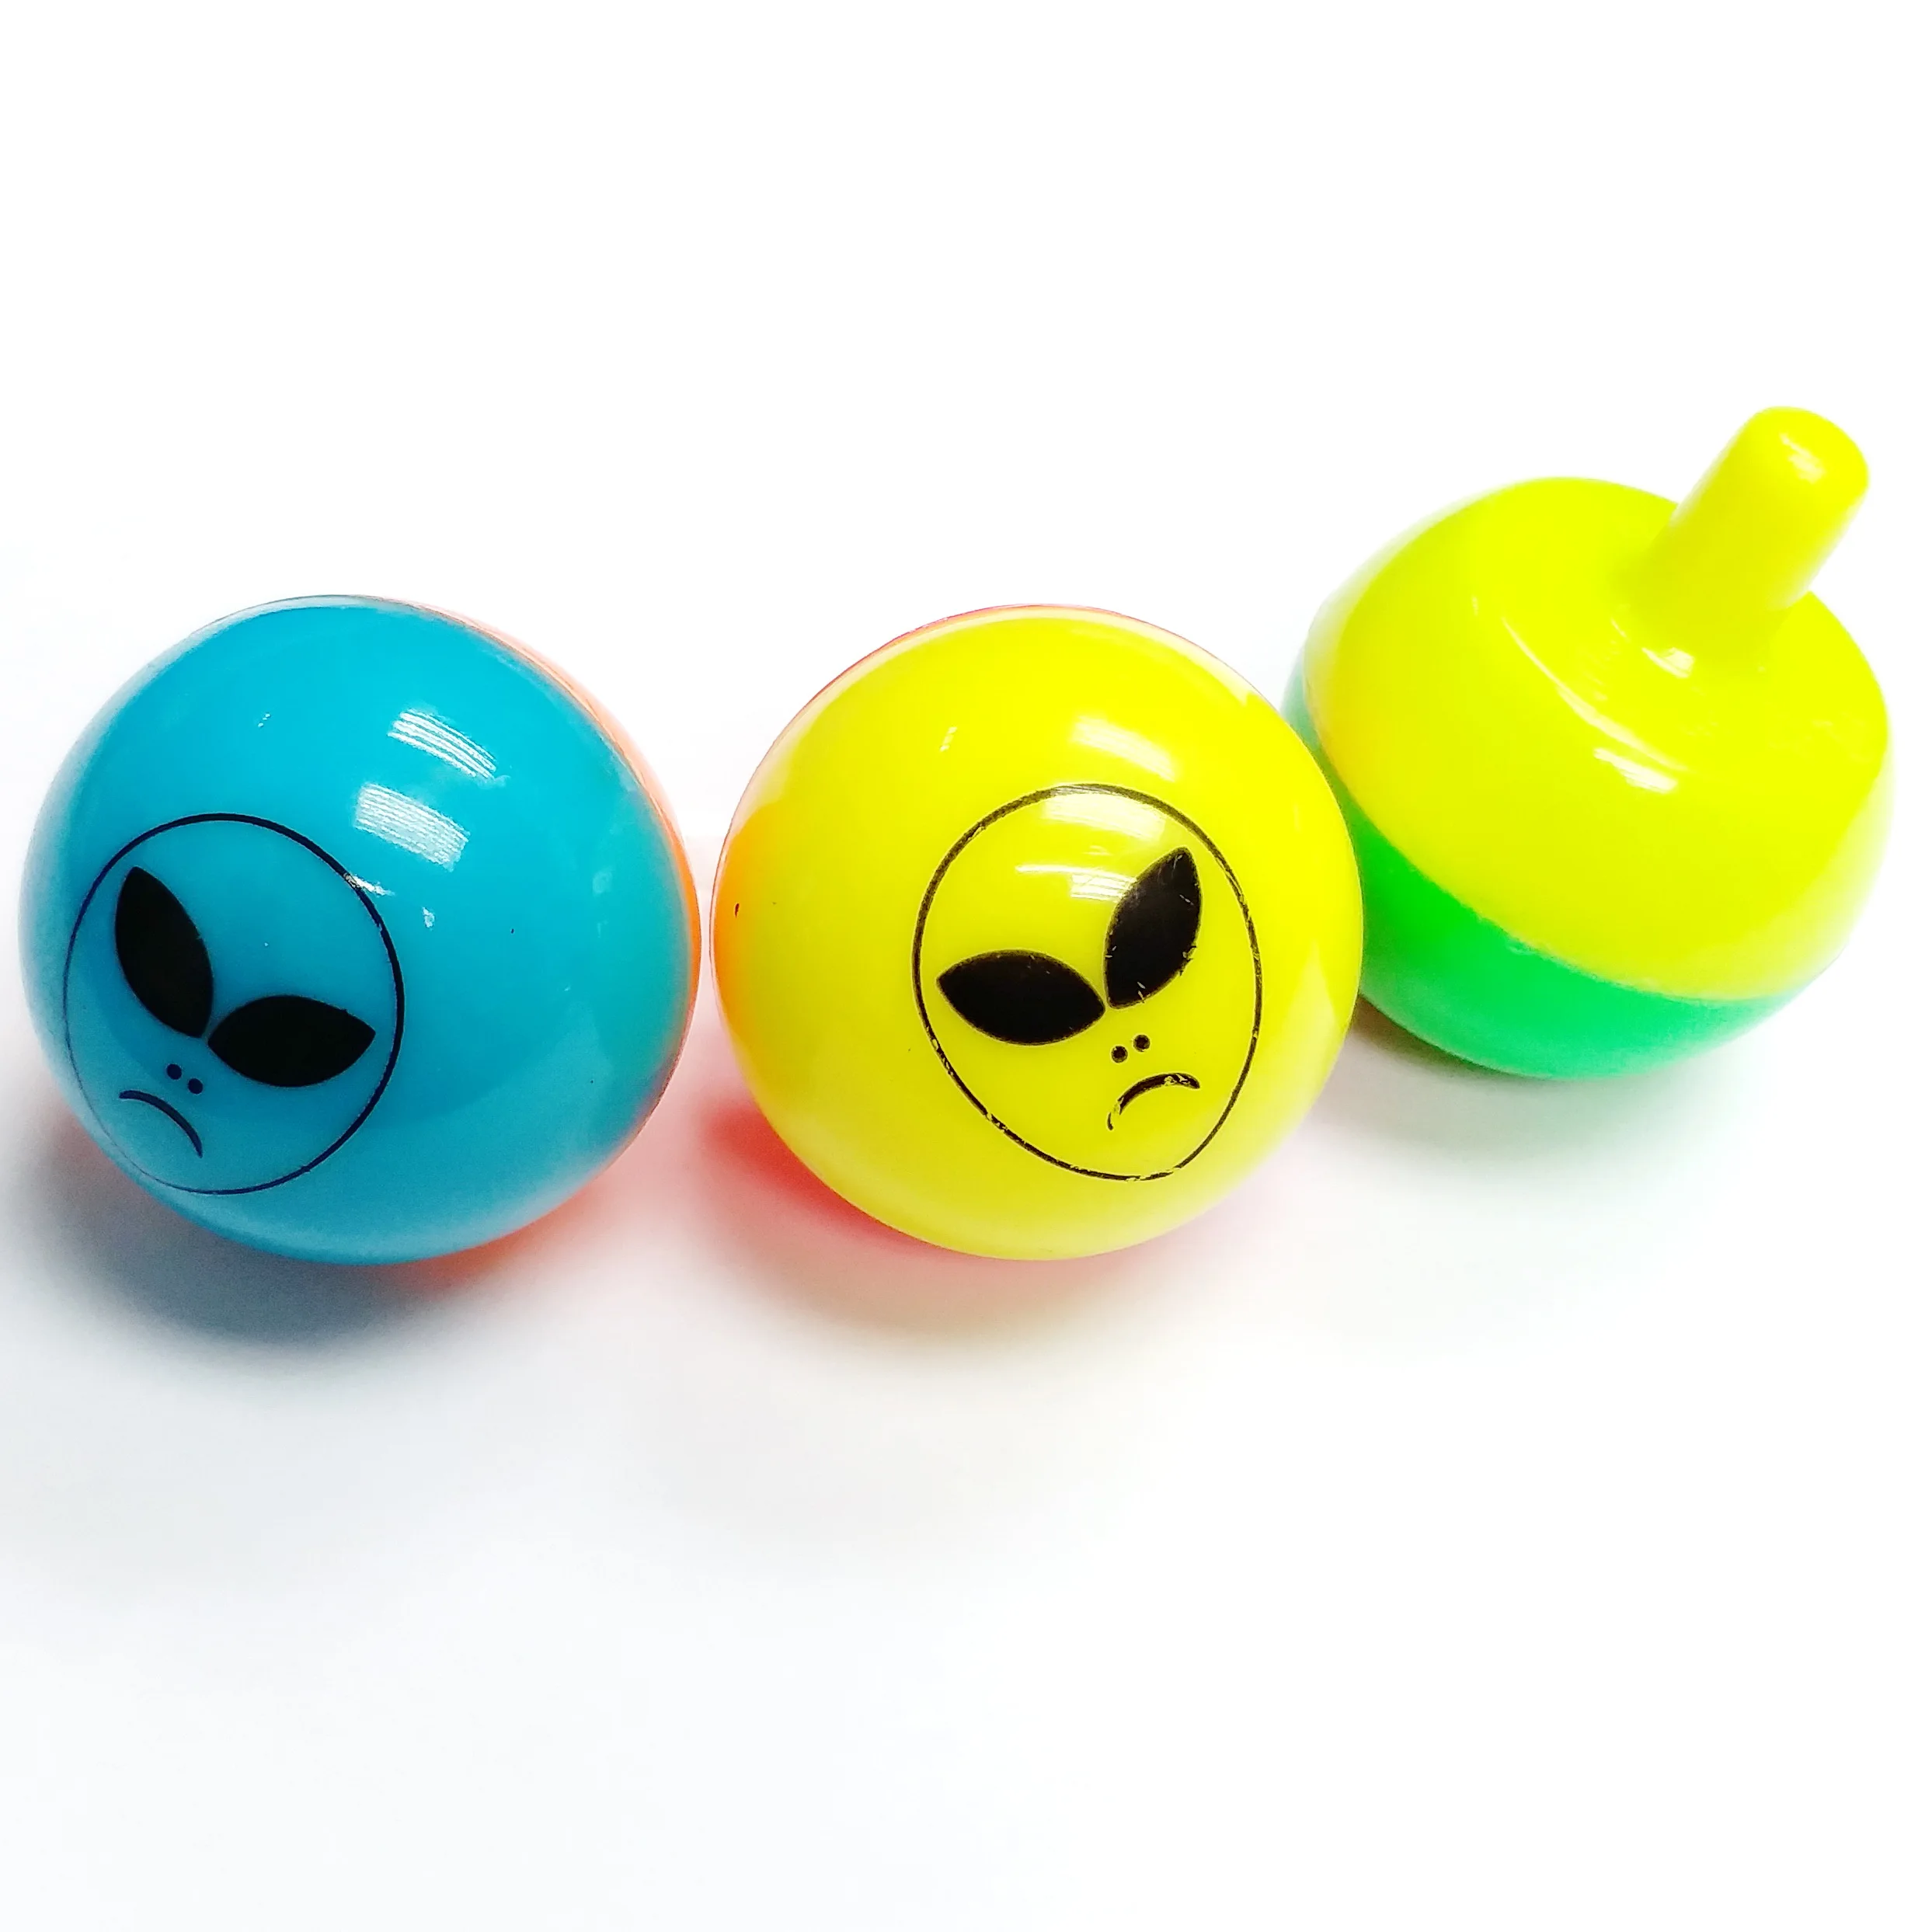 

12 pc Alien Spin Tops Boy Girl Kids Toys Spinner Birthday Party Favor Pinata Bag Filler Loot Gift Novelty School Classroom Prize